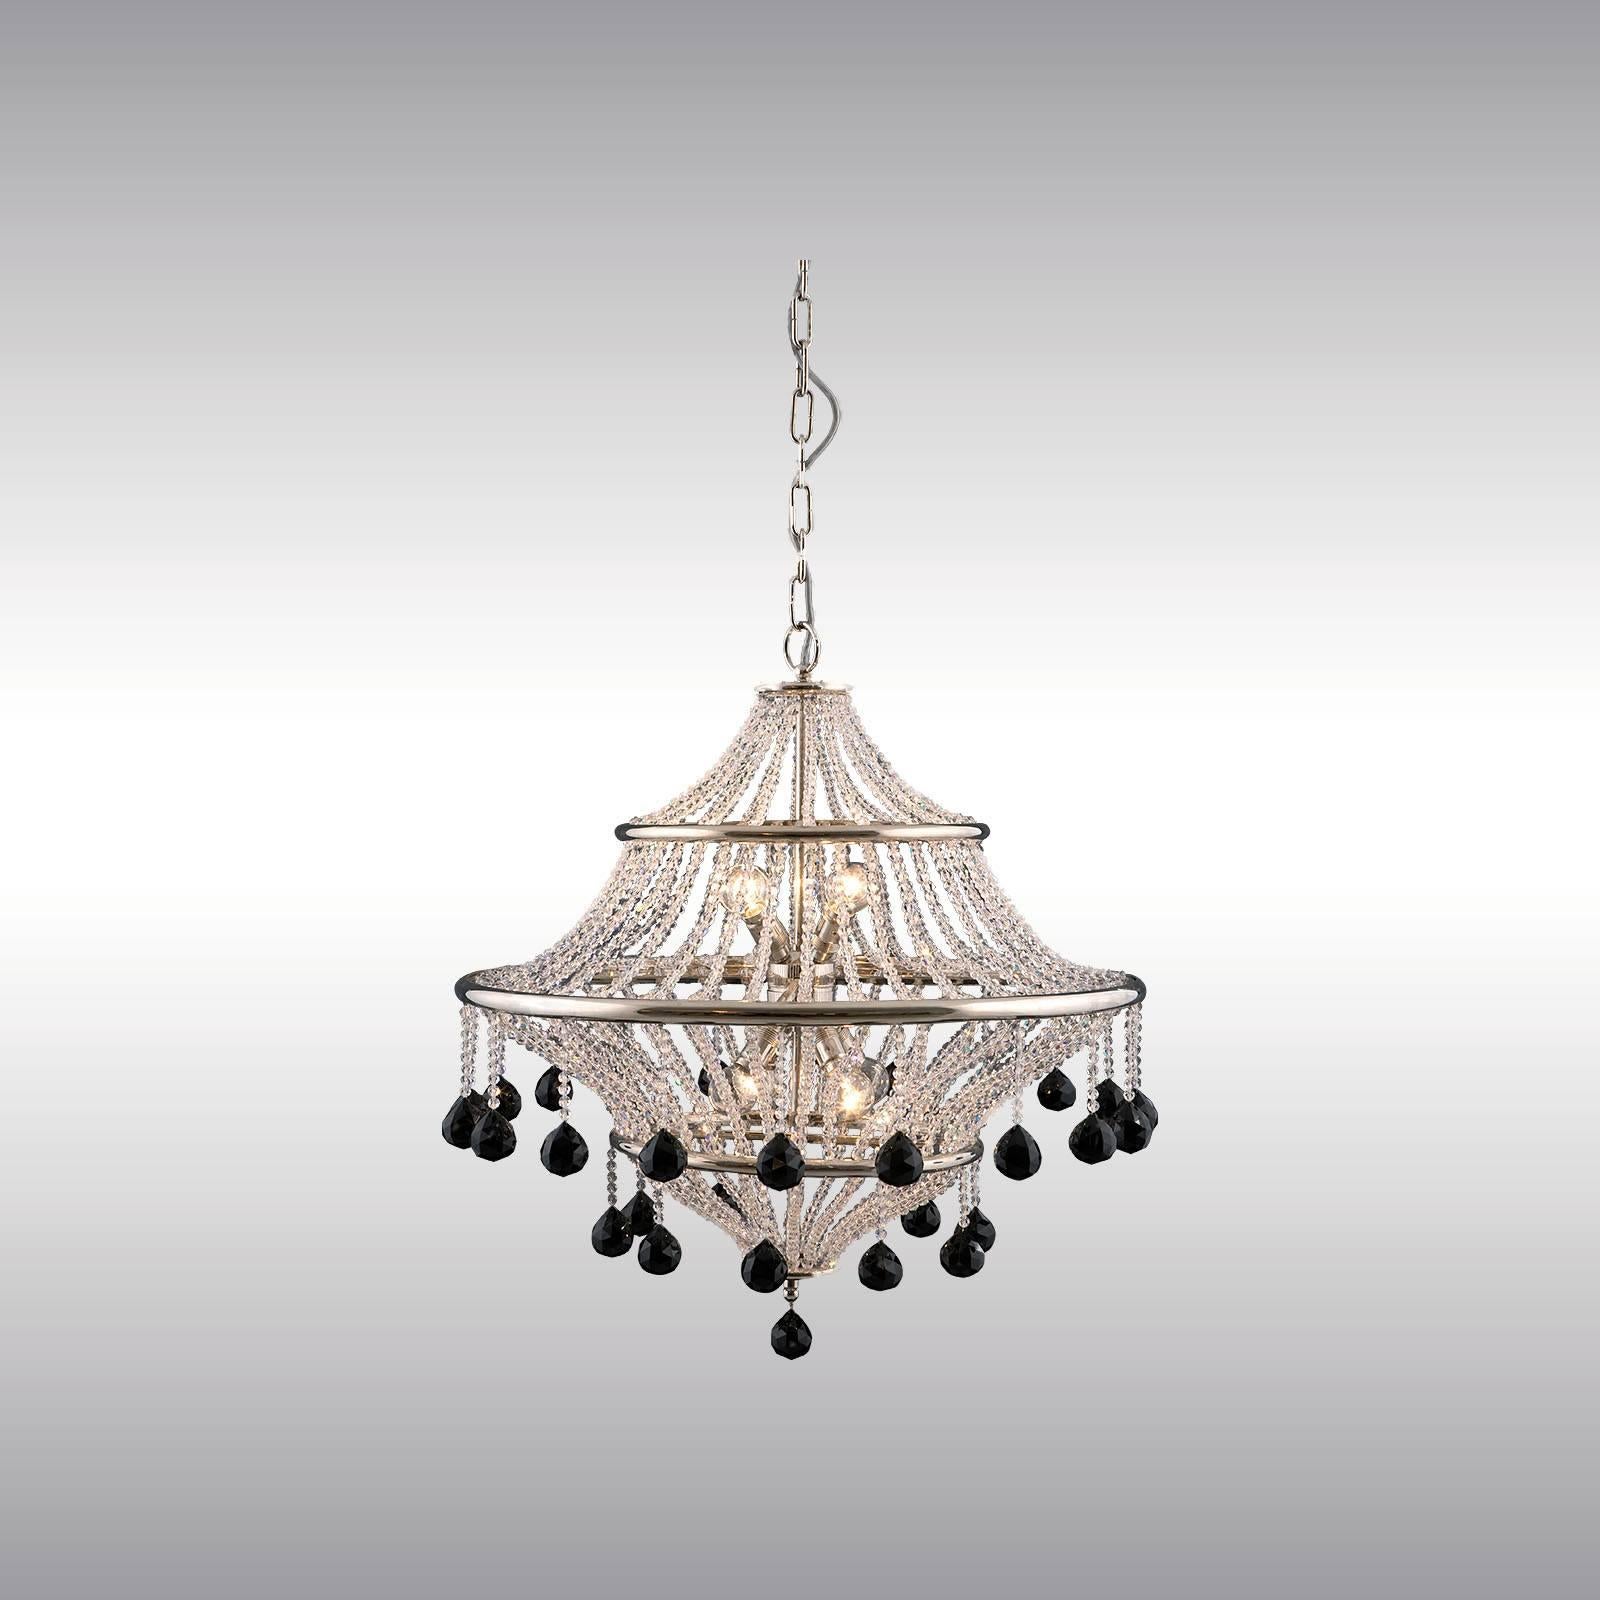 Magnificent crystal-chandelier, once and unique presented at the Wiener Werkstaetten Room from the Austrian House at the Werkbundausstellung Koeln/Germany, 1914.

All components according to the UL regulations, with an additional charge we will